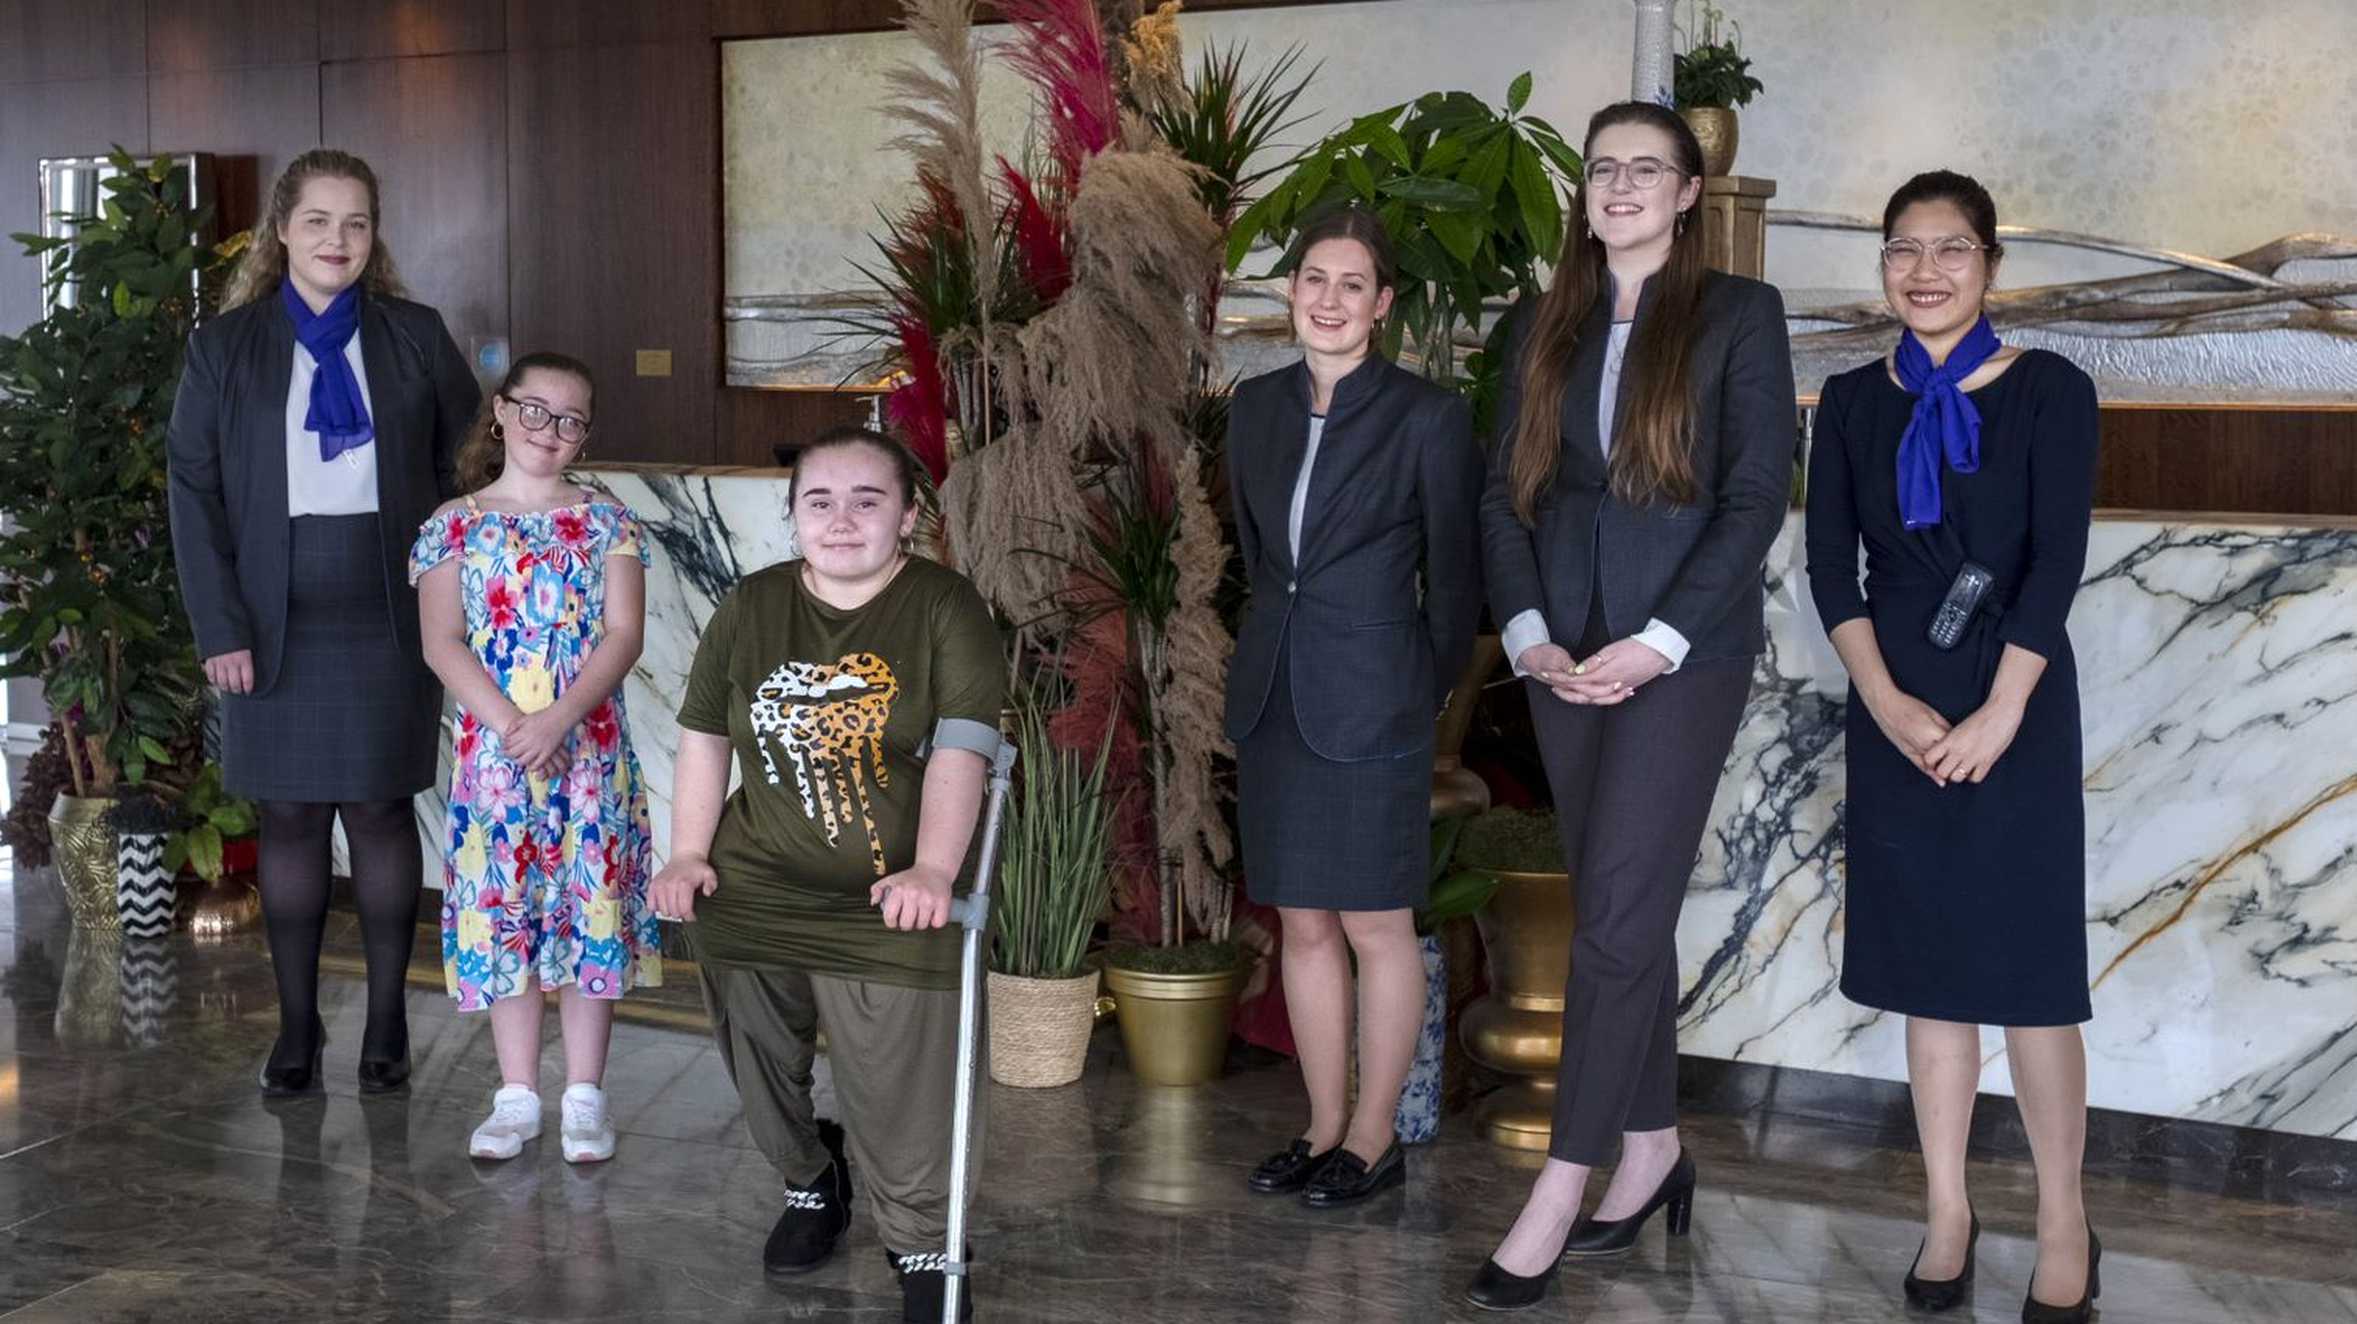 Angel and Mikayla with the hotel staff.